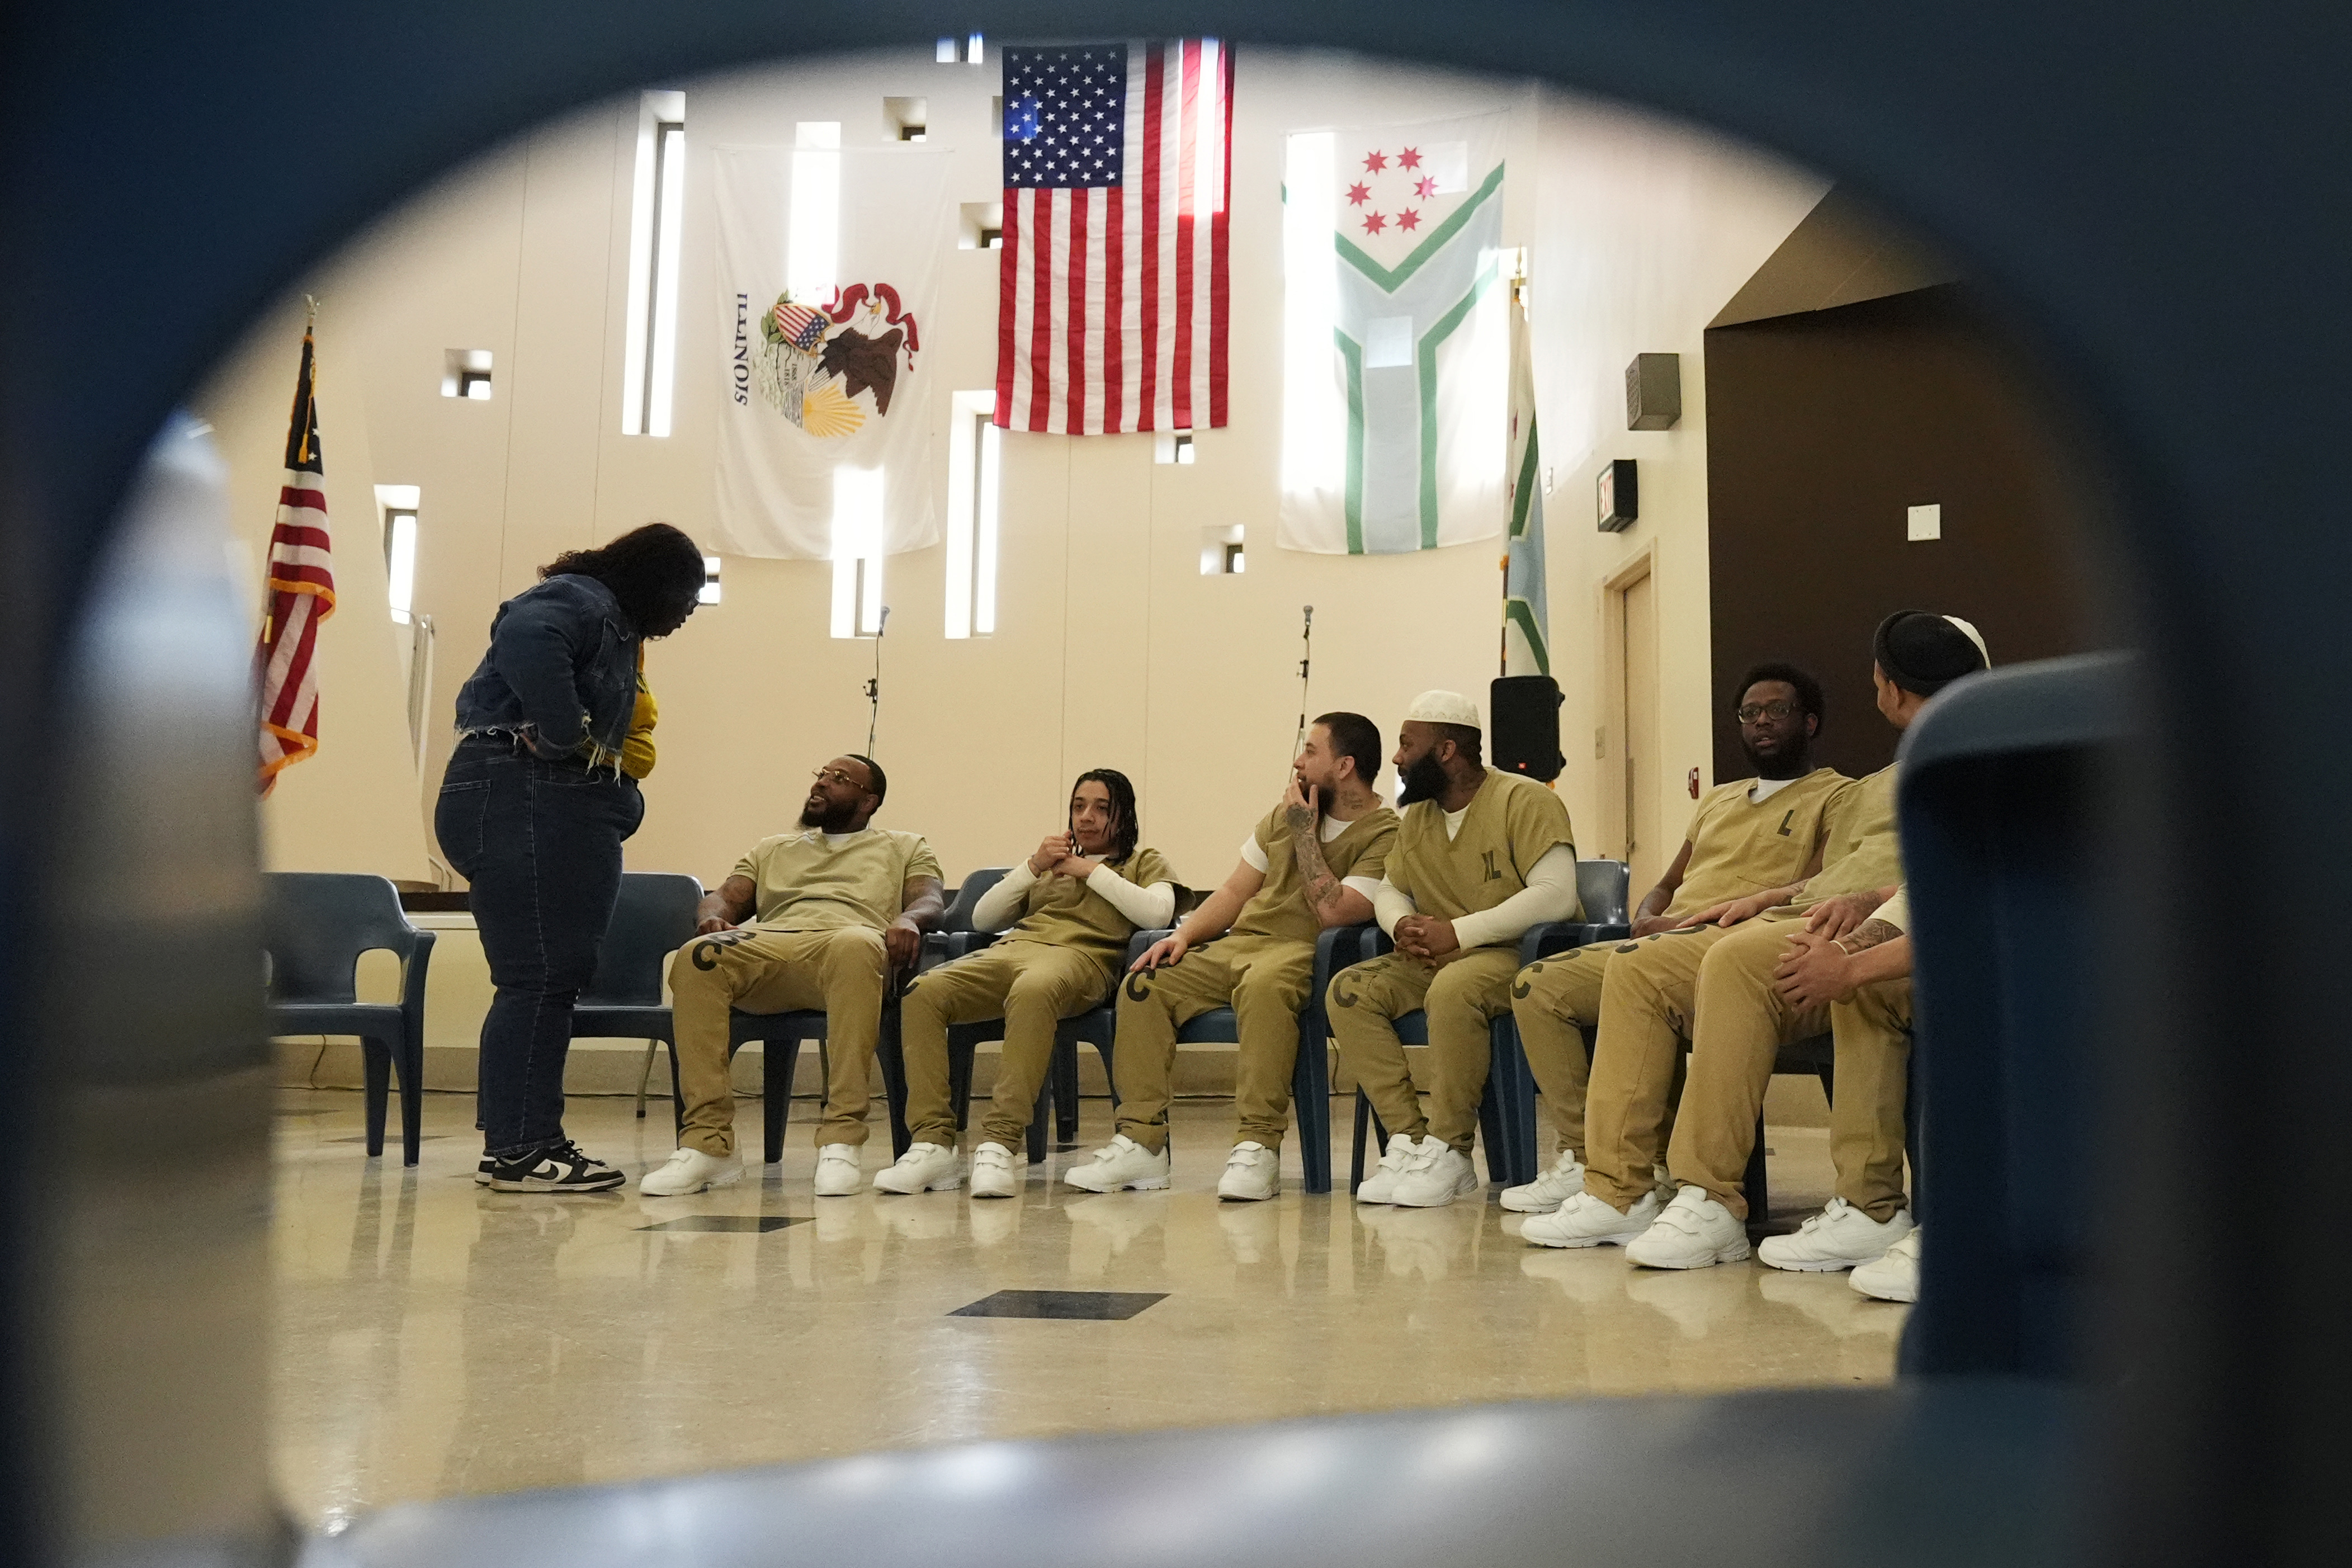 DePaul student Nana Ampoto, left, talks with detainees during a...